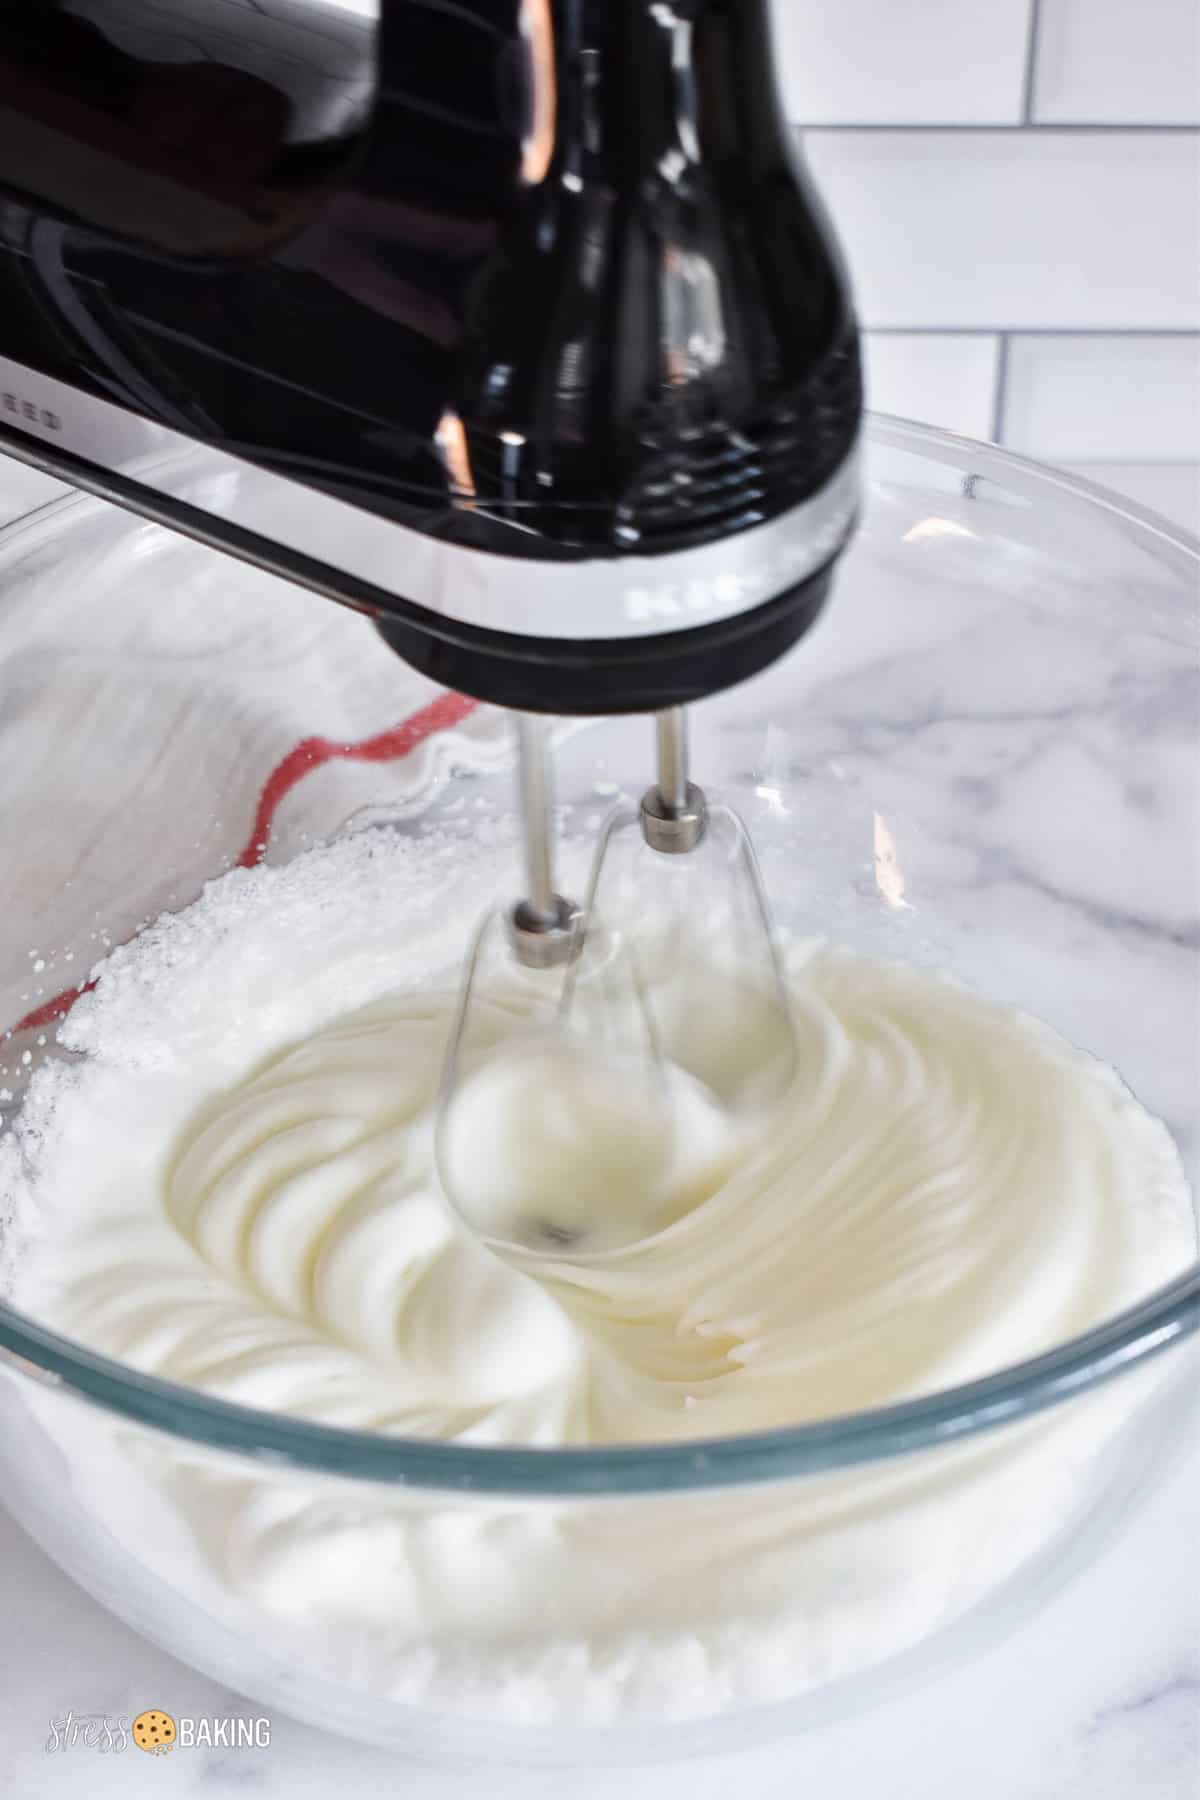 Black electric hand mixer whipping egg whites in a clear mixing bowl